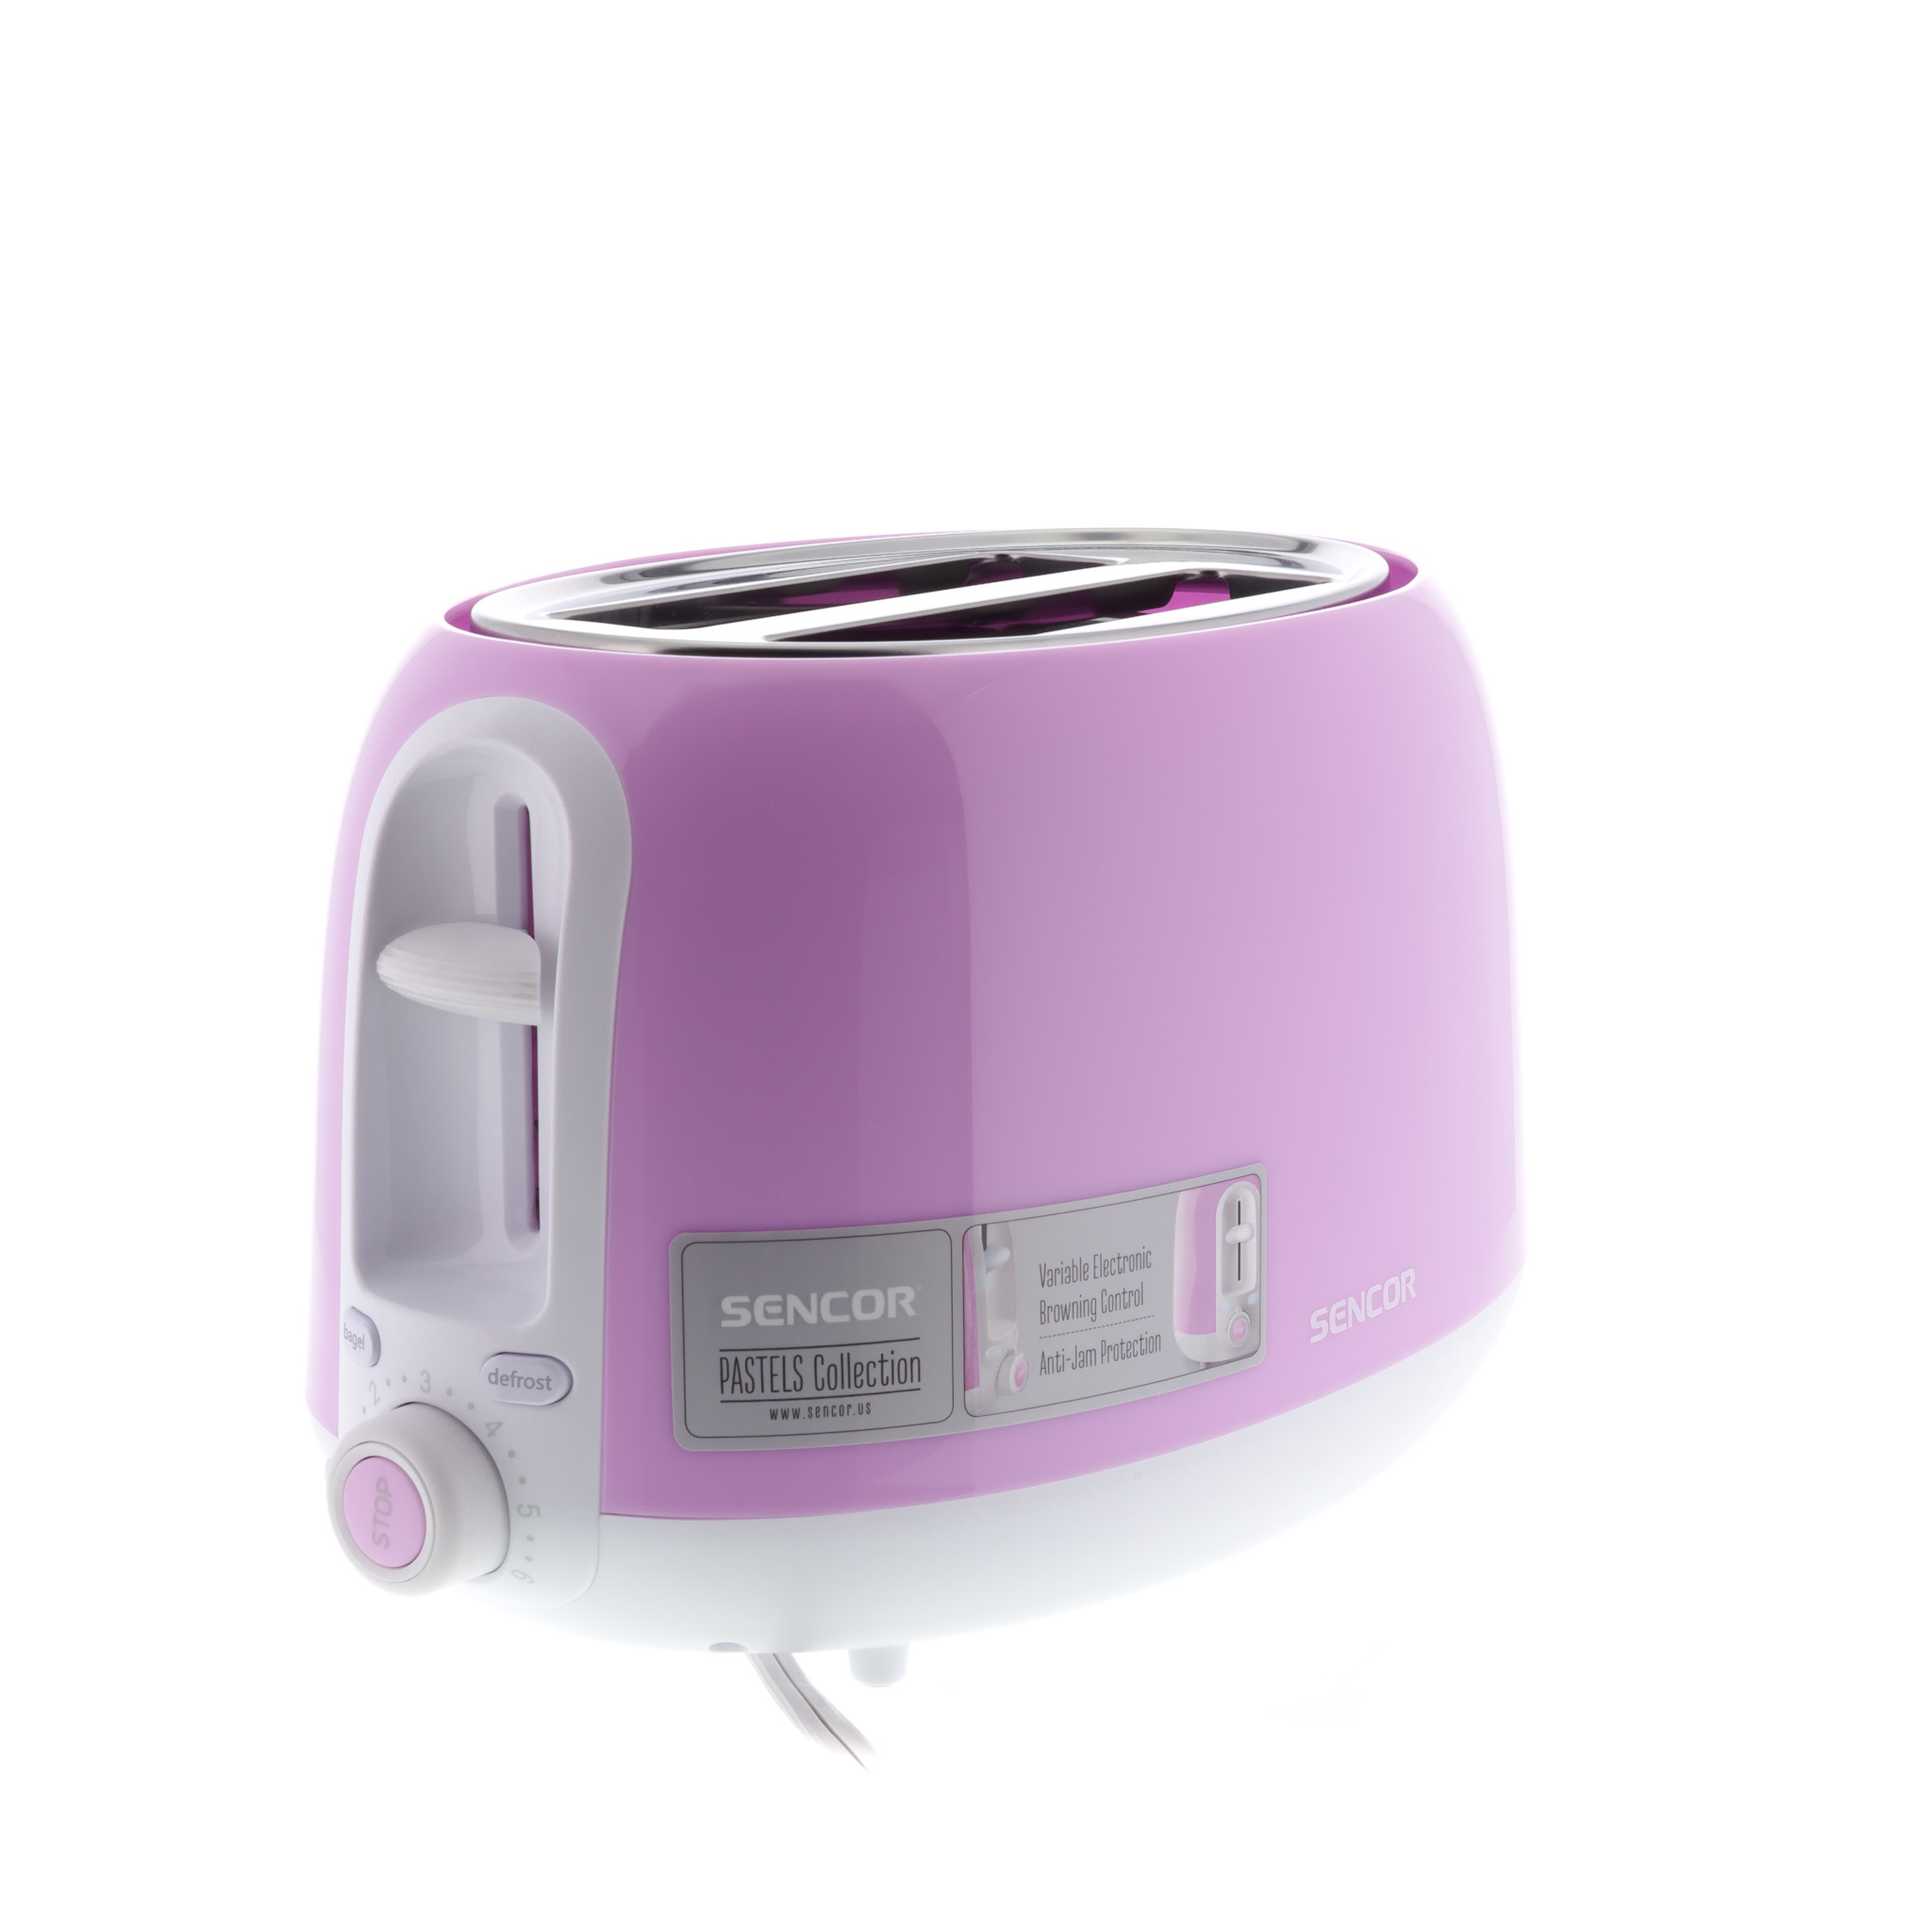 Electric Toaster, STS 6053VT